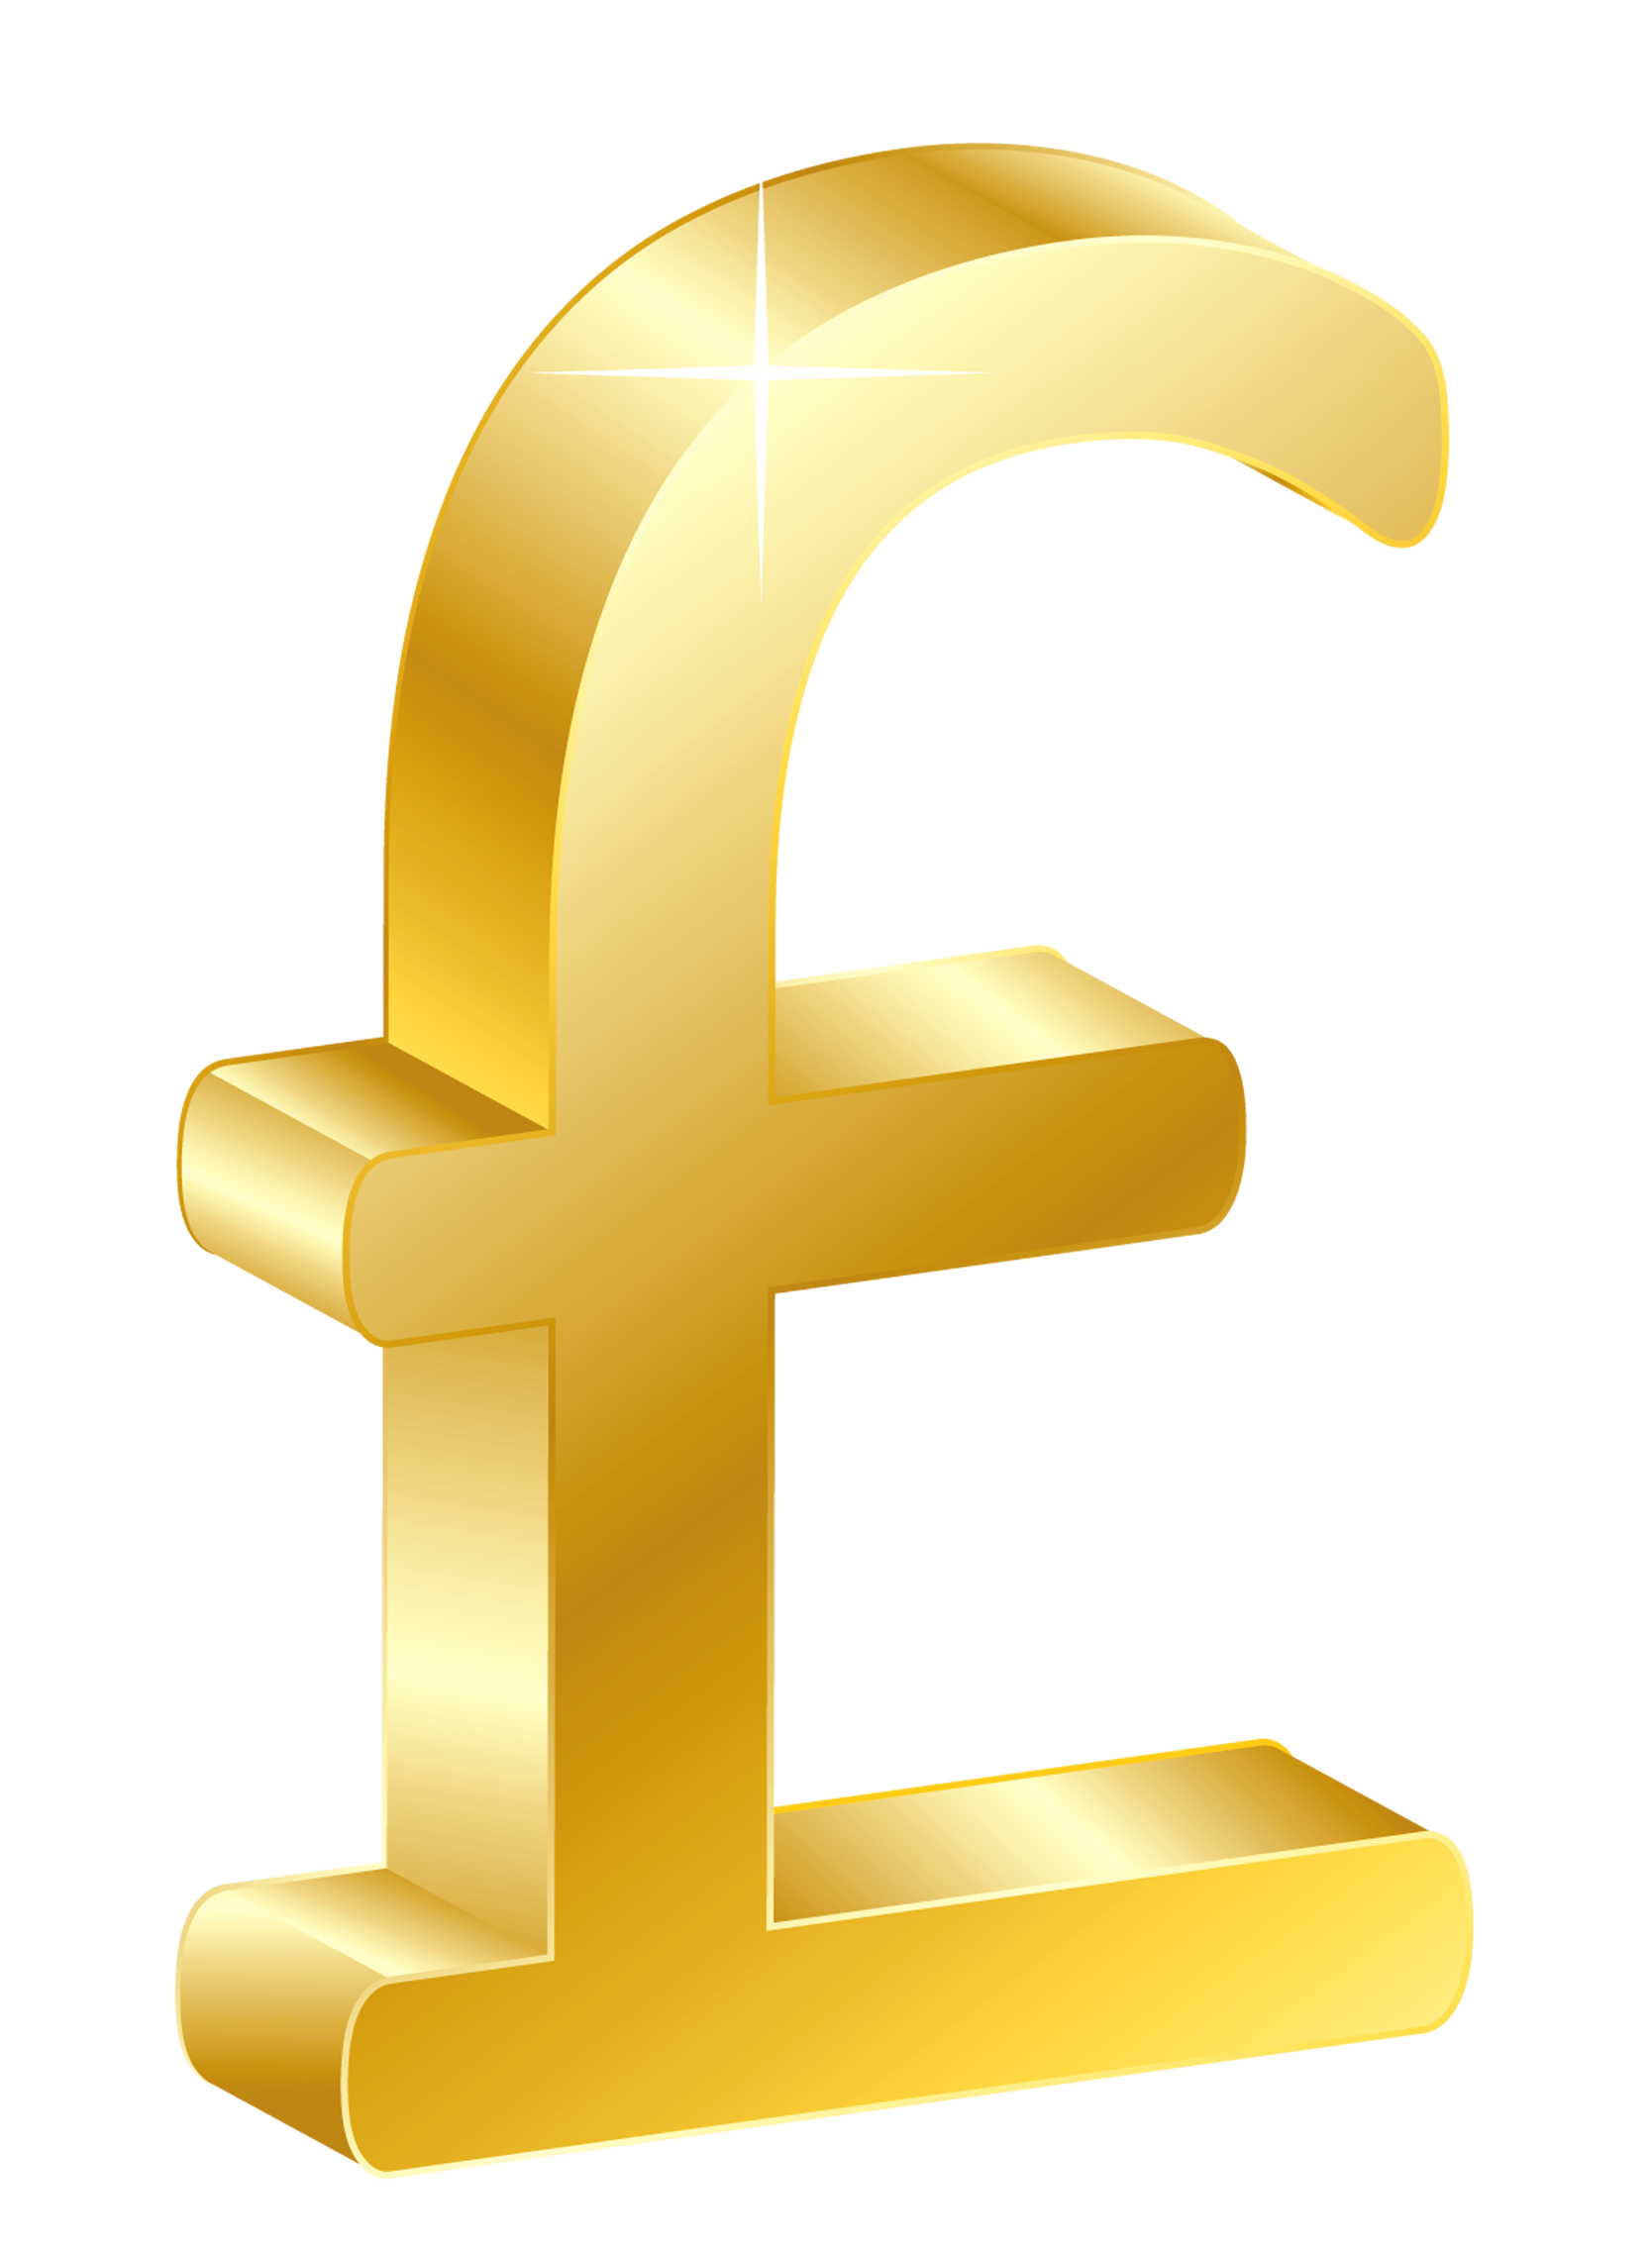 3D Gold UK Pound PNG Clipart